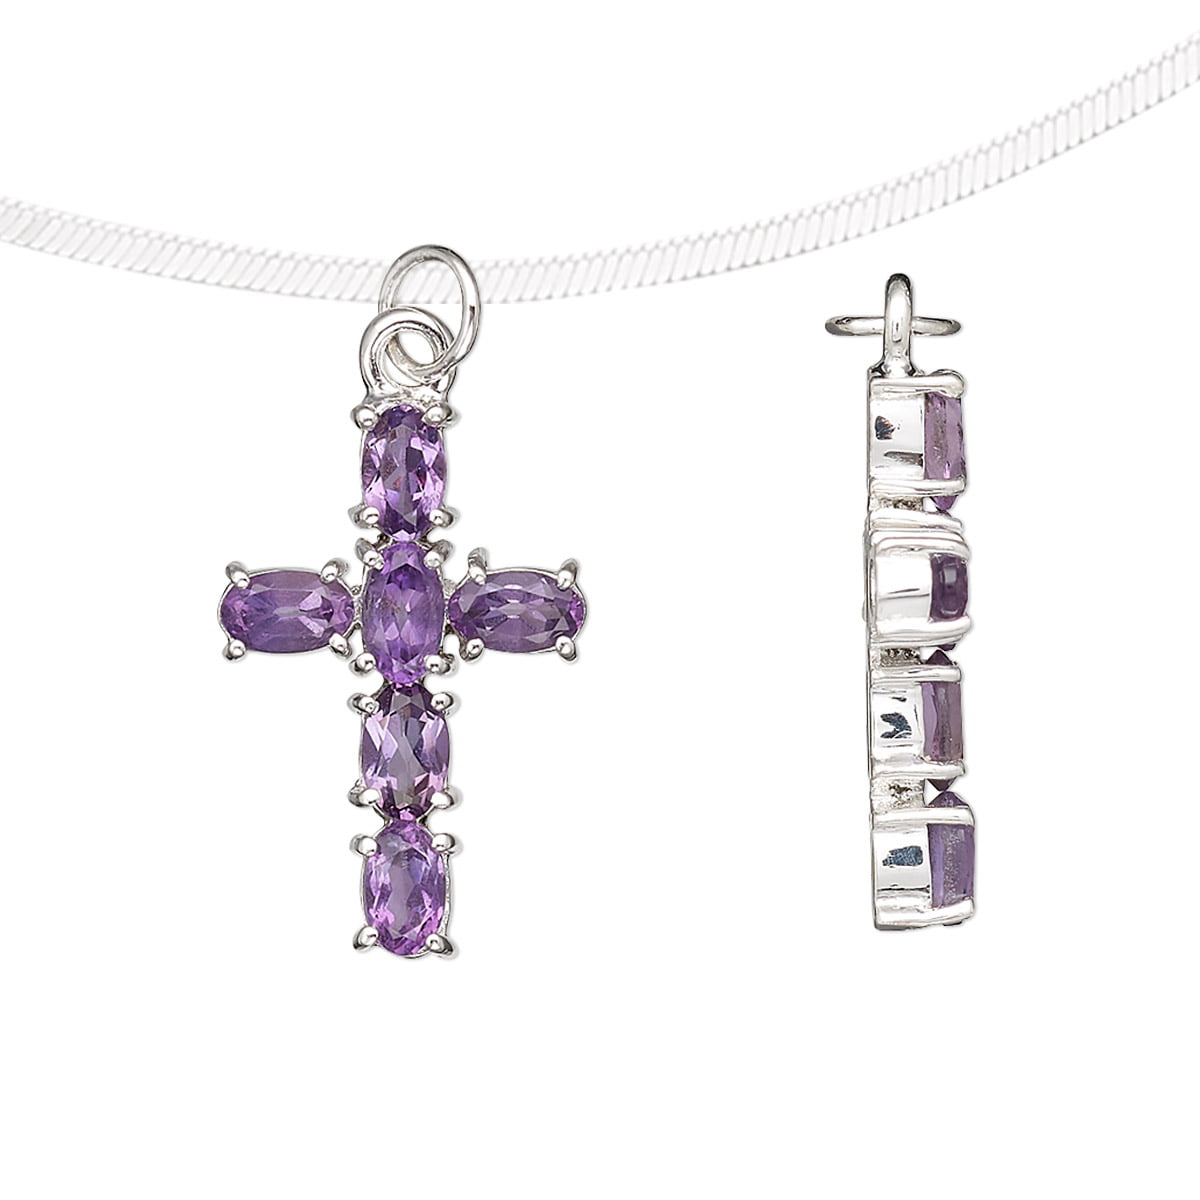 925 Sterling Silver 21x14mm Polished Religious Faith Cross Pendant Necklace Jewelry Gifts for Women